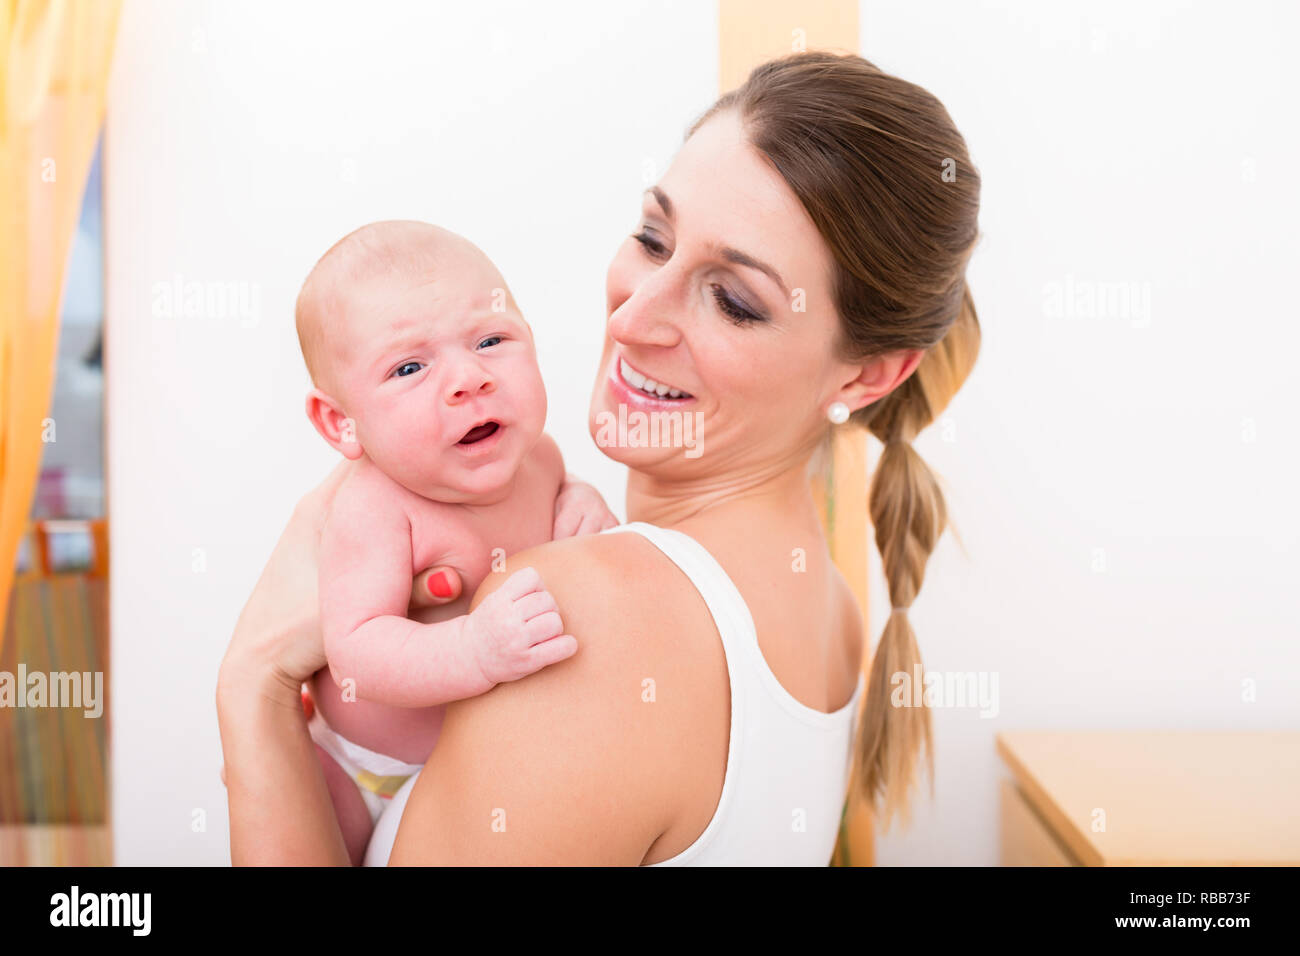 Mother carrying her newborn baby Stock Photo